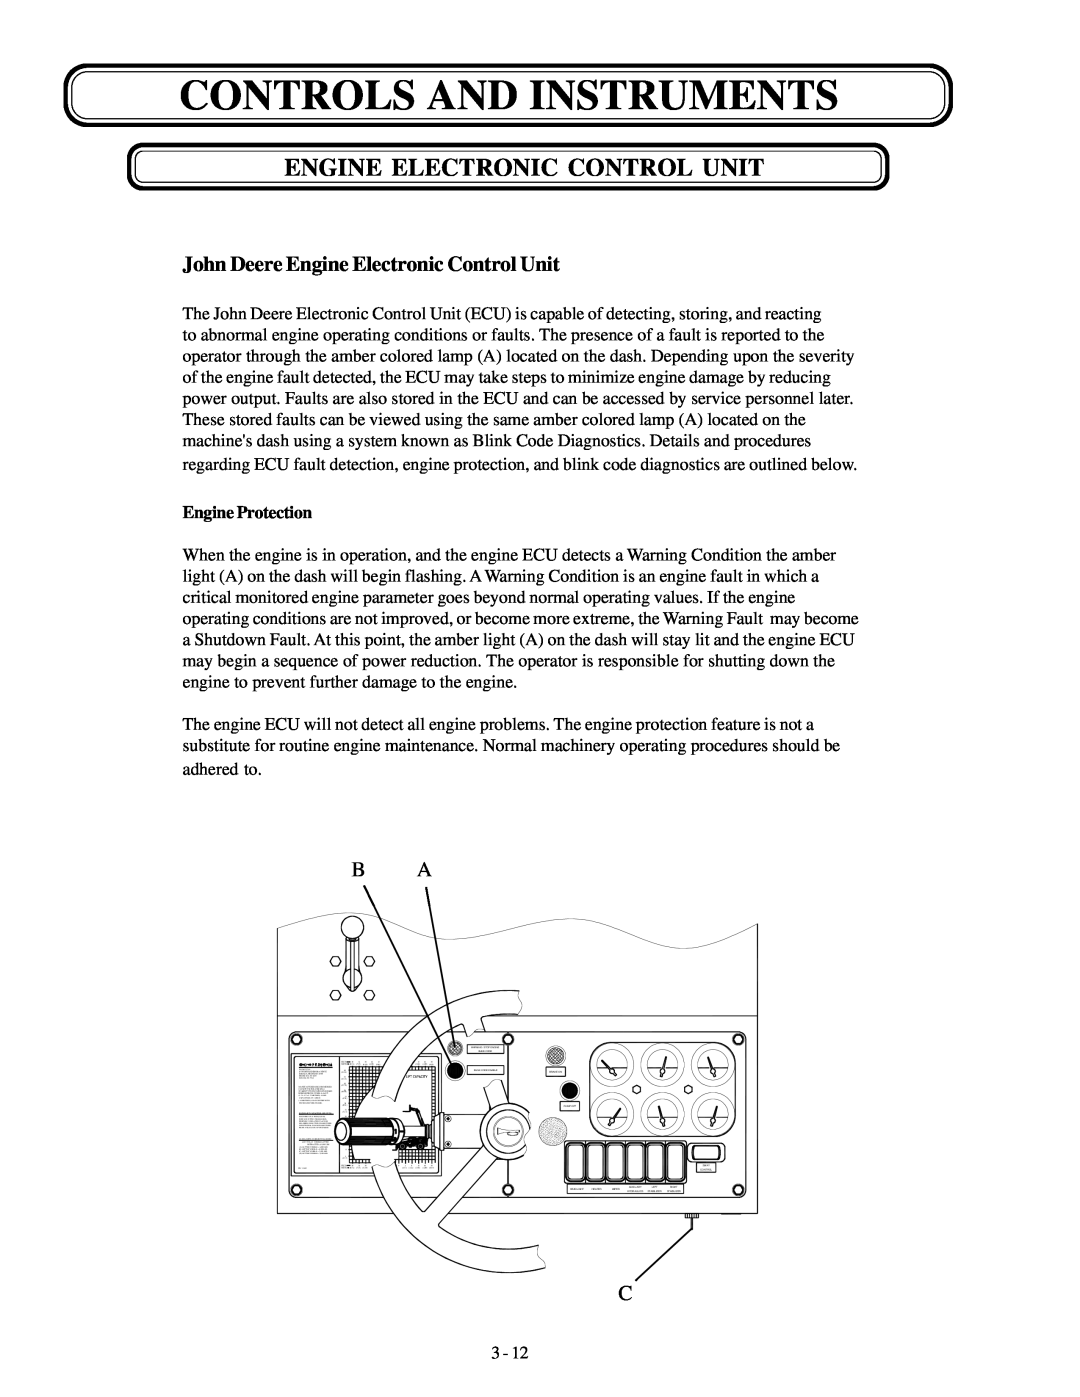 Genie GTH-1056, GTH-1048 manual Controls And Instruments, John Deere Engine Electronic Control Unit 